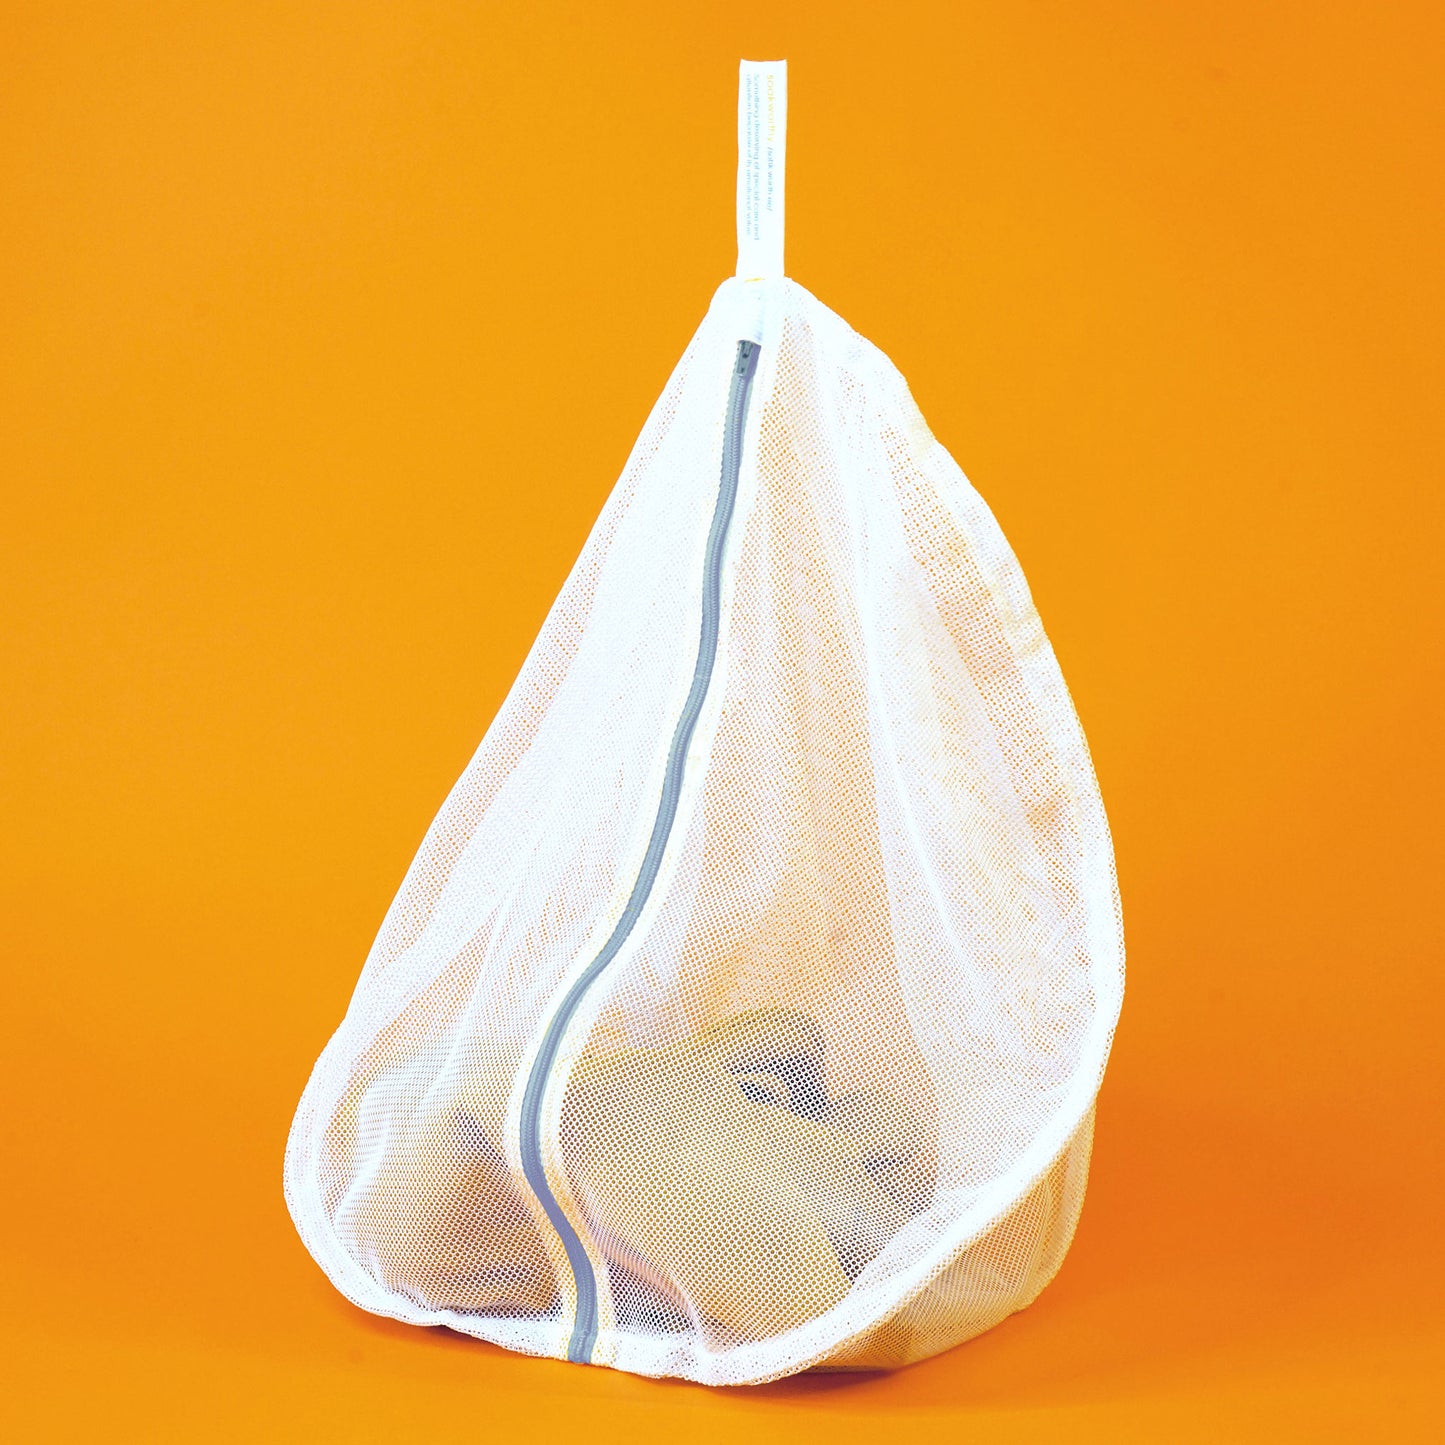 White mesh delicates bag by Soak with a light blue zipper displayed on an orange background; a piece of soft khaki clothing is visible inside